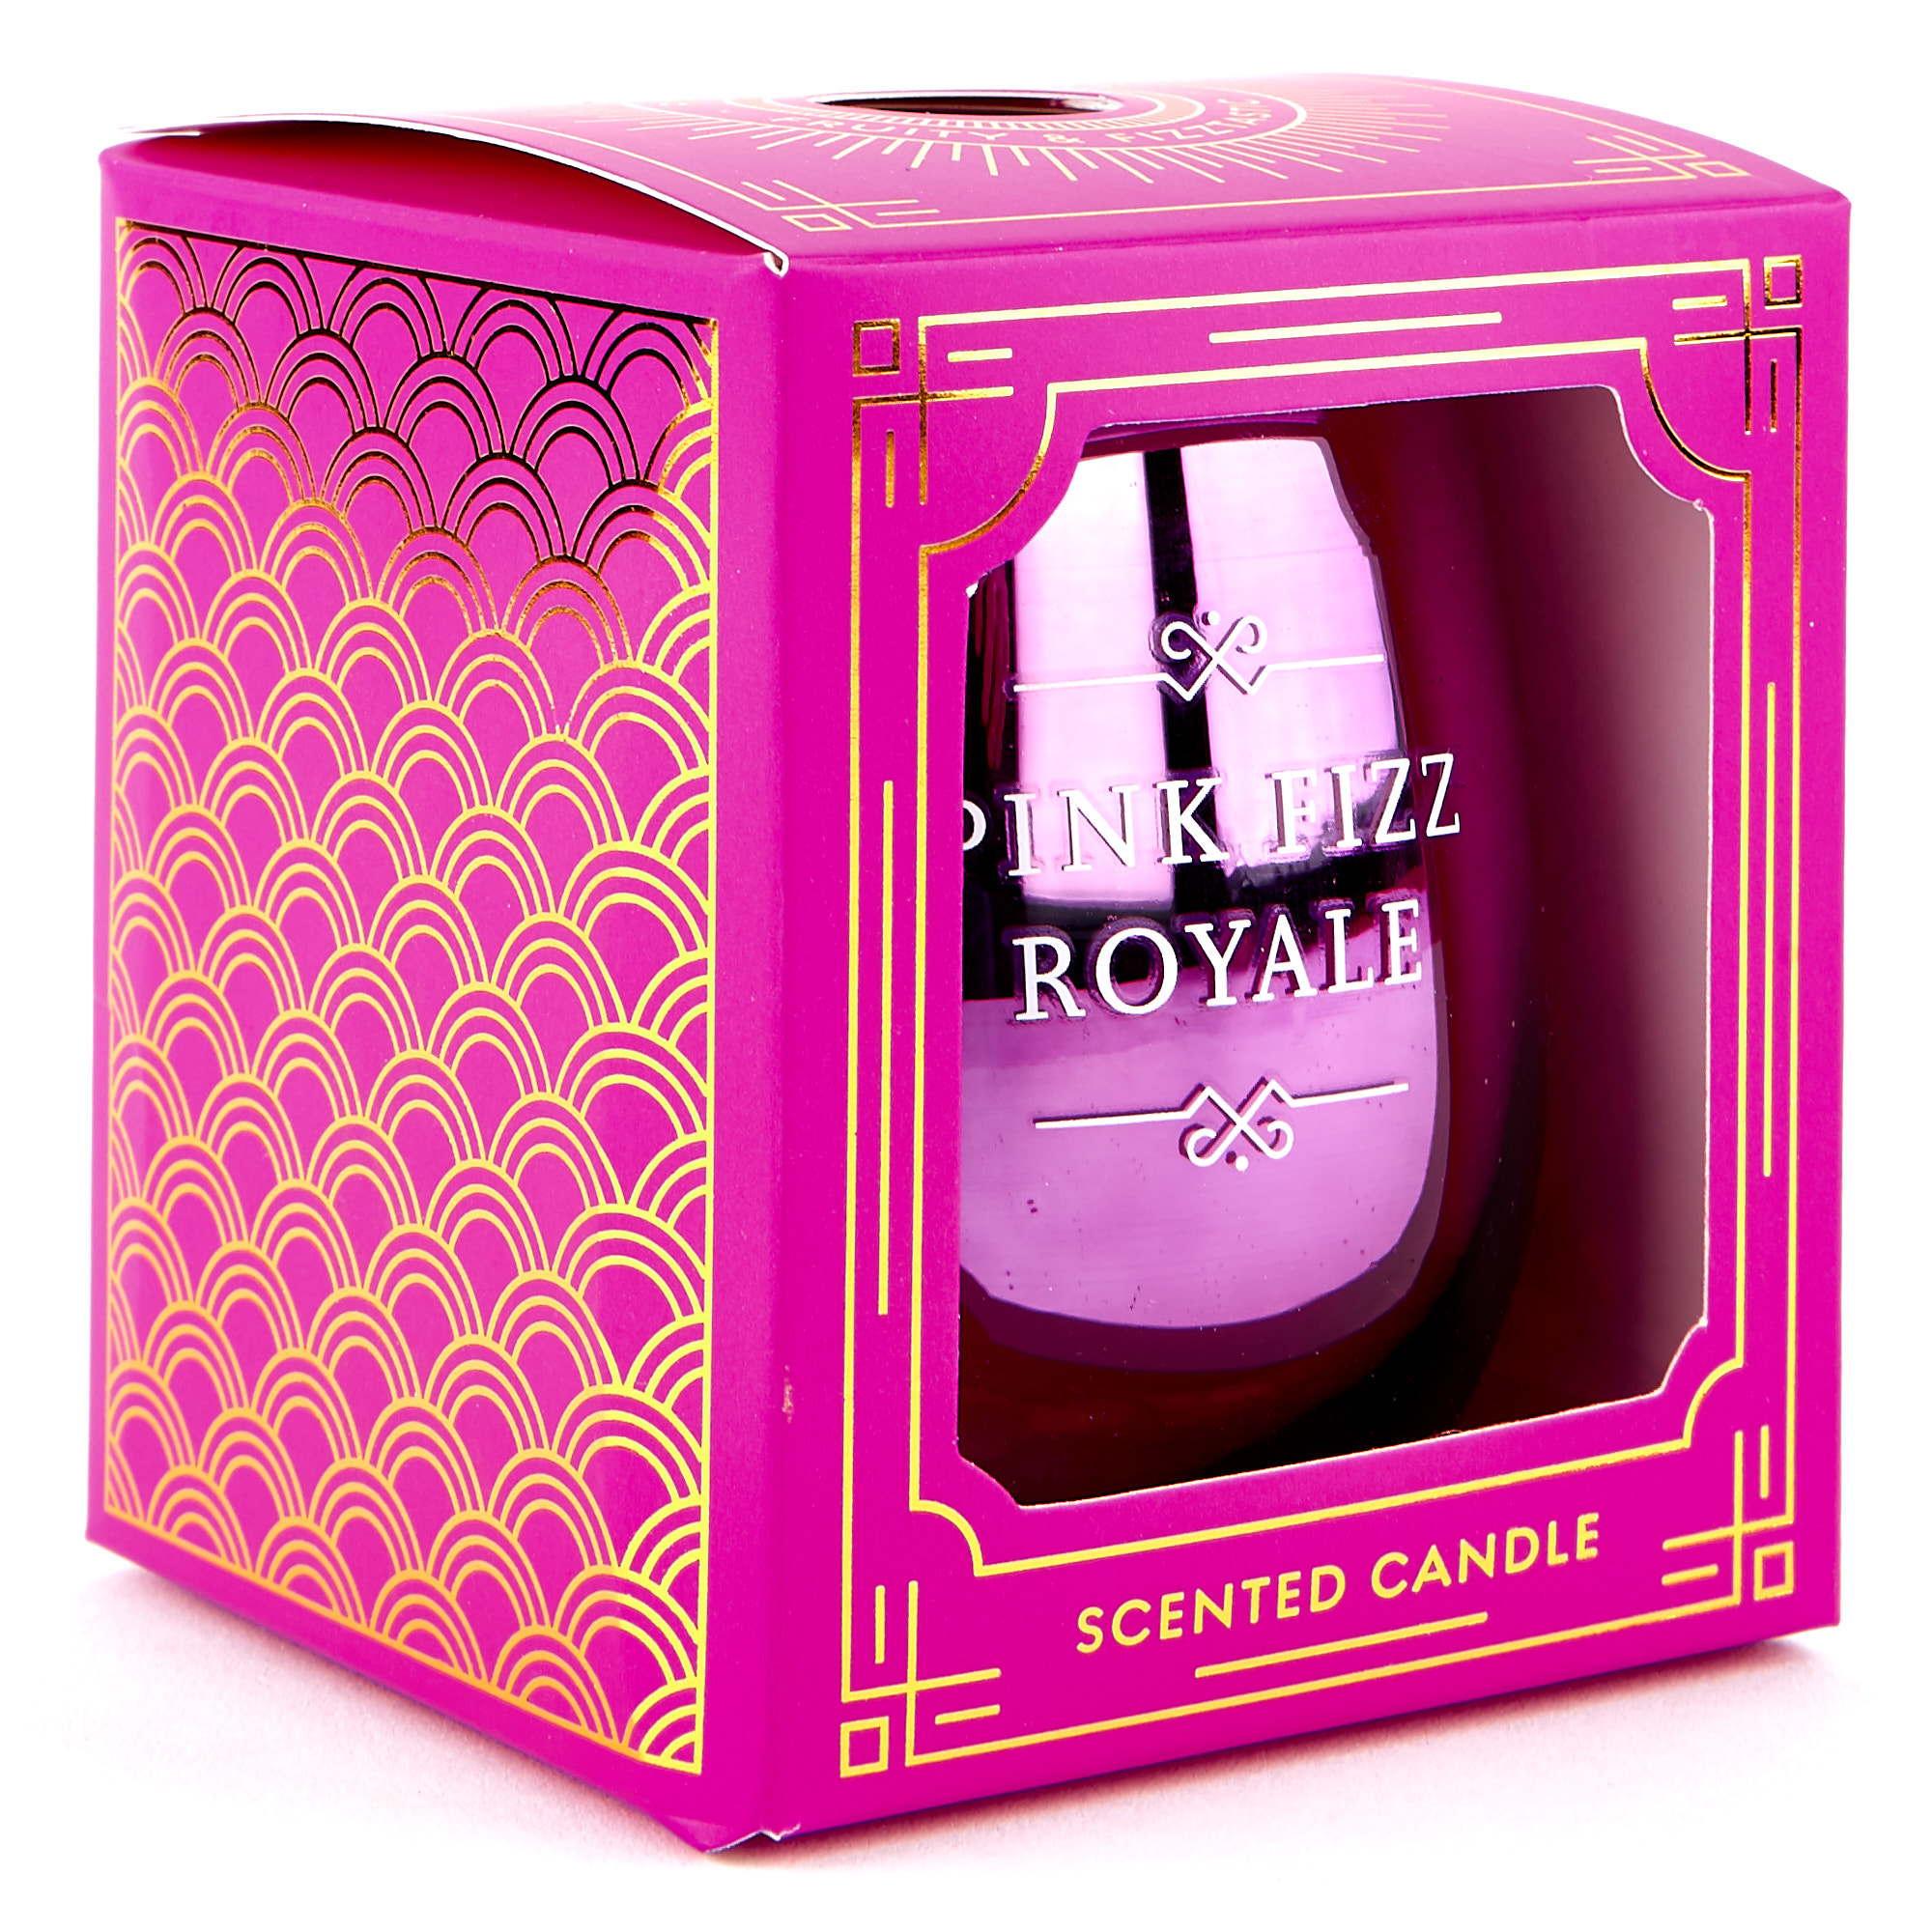 Pink Fizz Royale Scented Candle